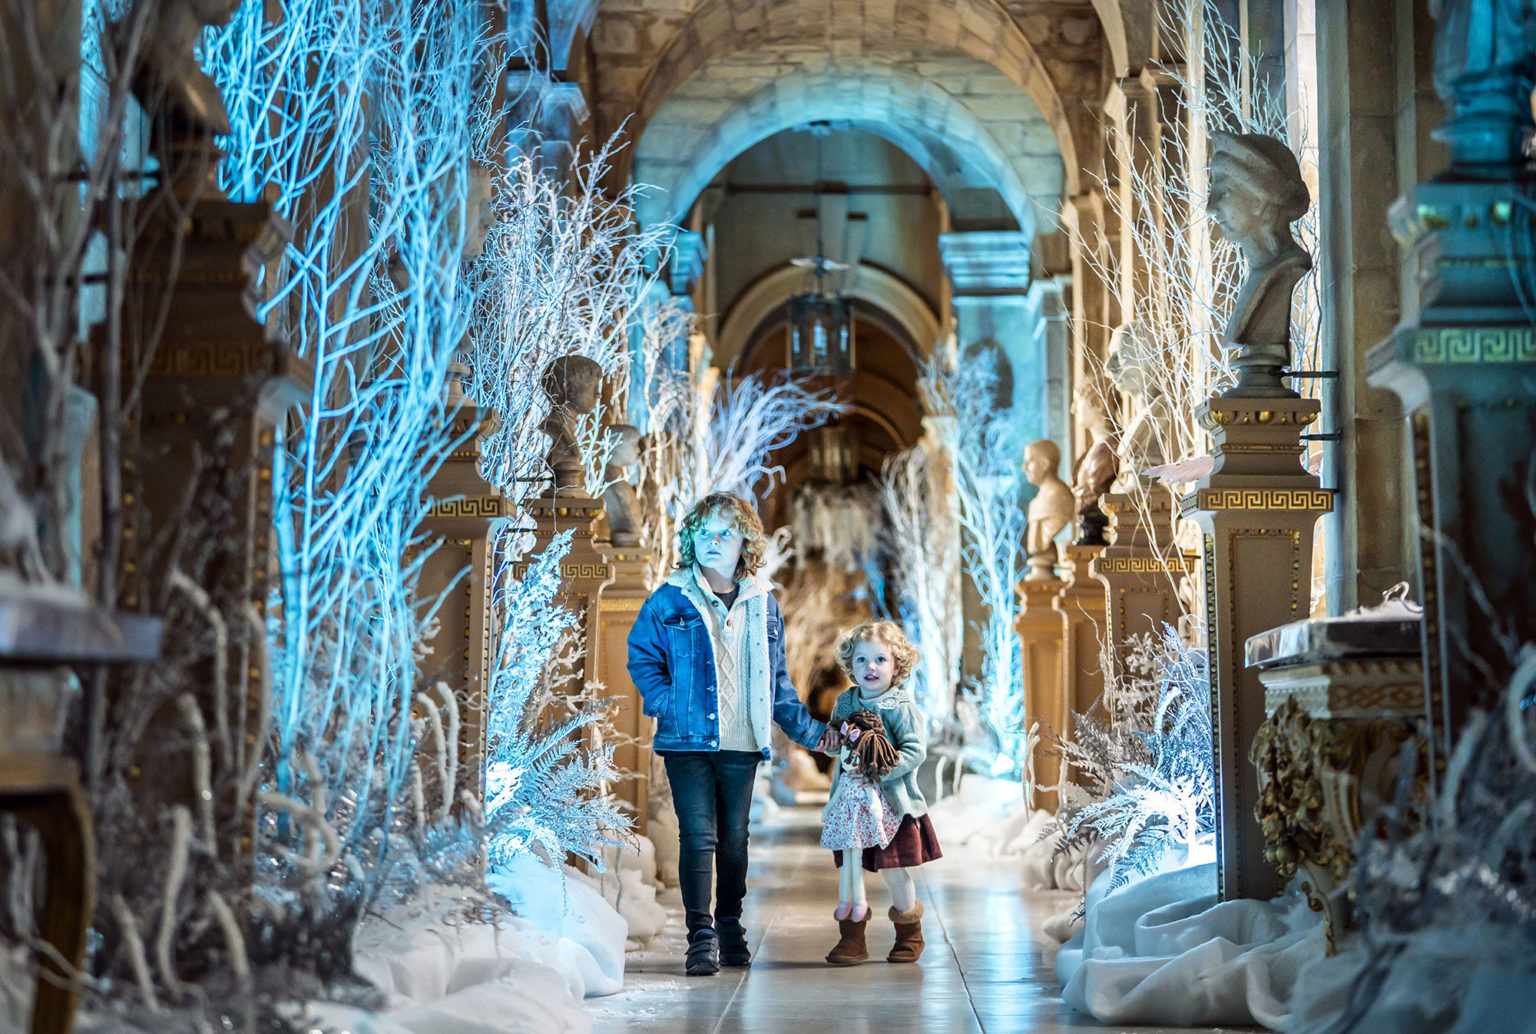 The Castle Howard Christmas display is a stunning Narnia adventure